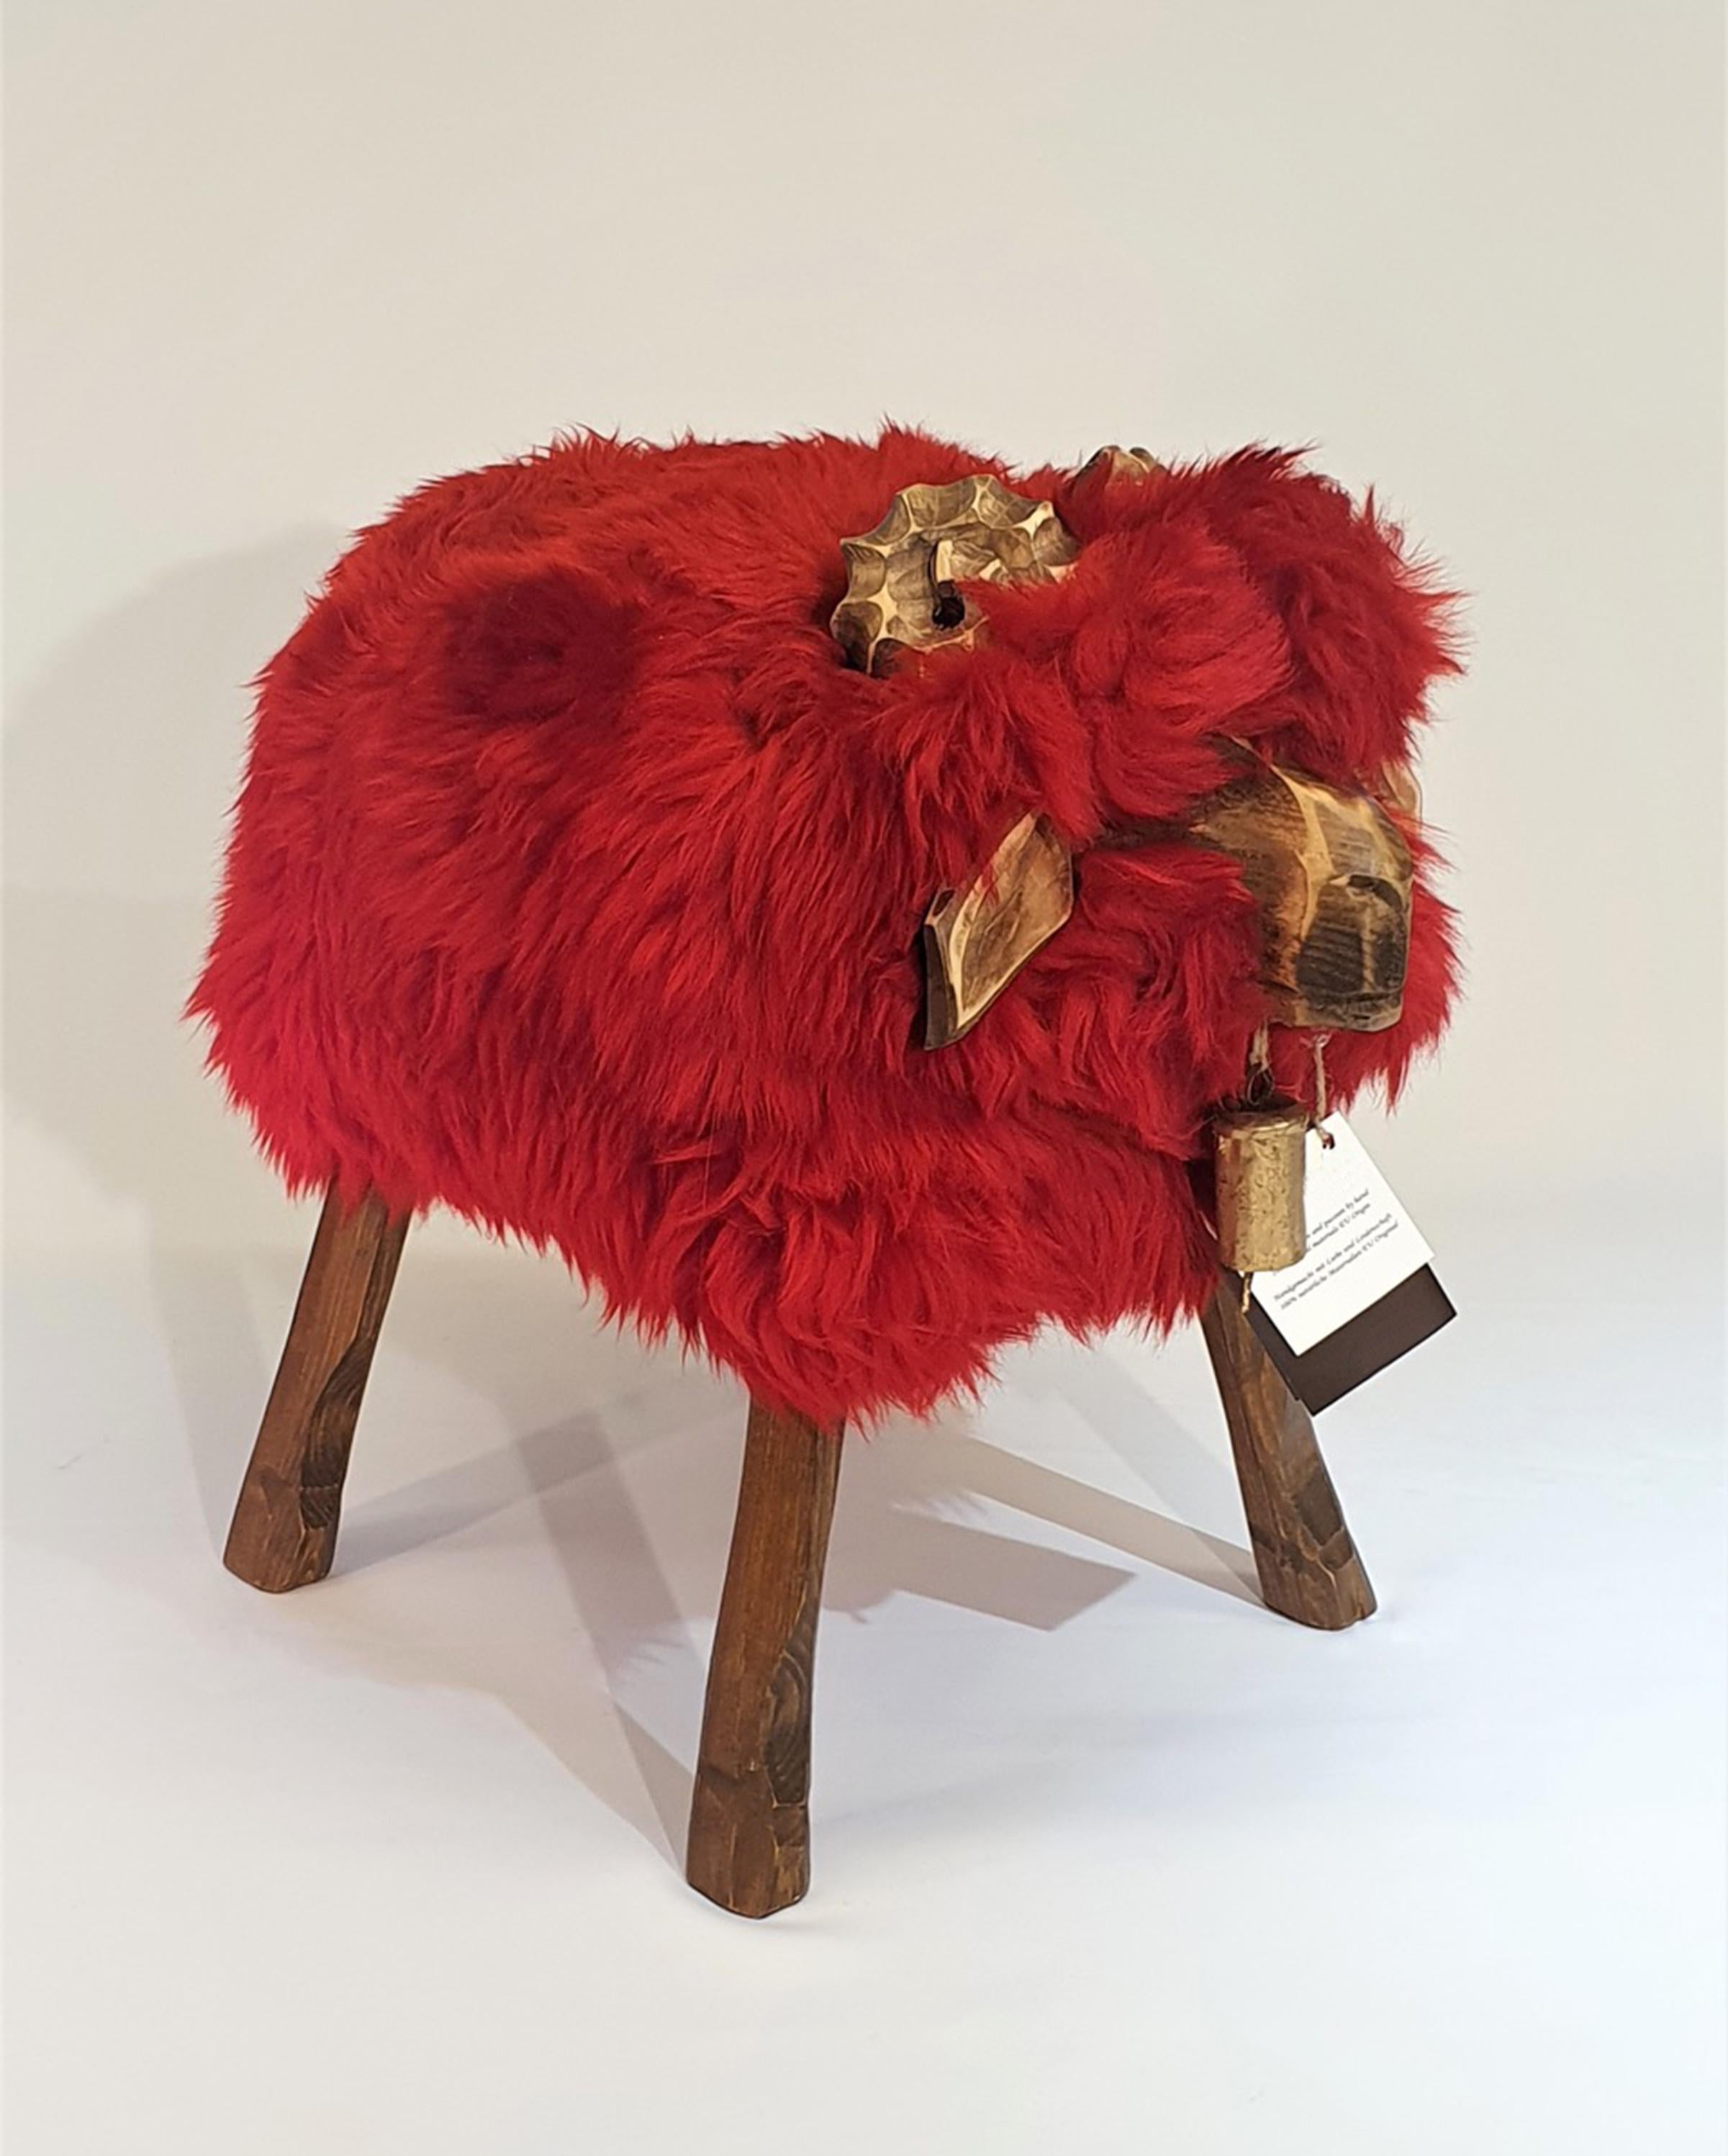 Our sheep stools are of the finest nature, each with its own character and lovingly hand-carved from basswood. We pay attention to the European origin of all natural materials used and also pass on the added value to the creator of our stools.